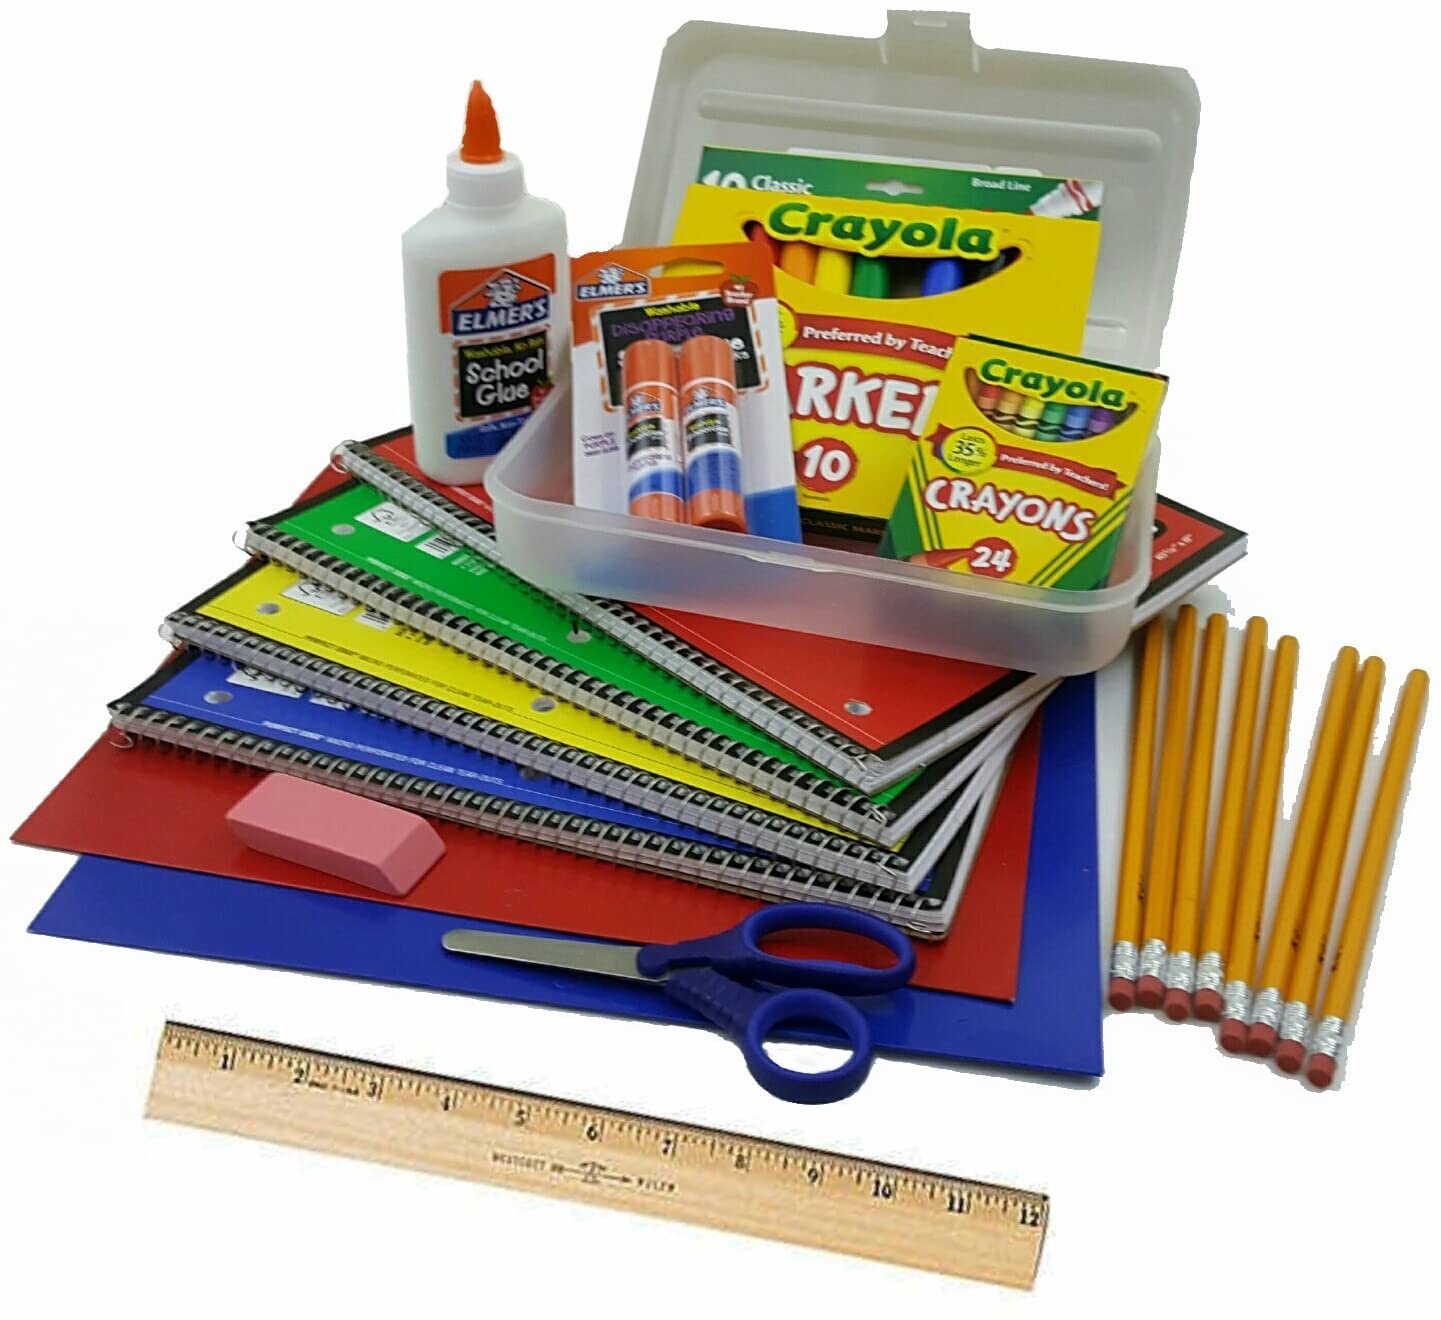 Old Mill School - MS. BECCARIS'S CLASS 2023-24 School Supply Package